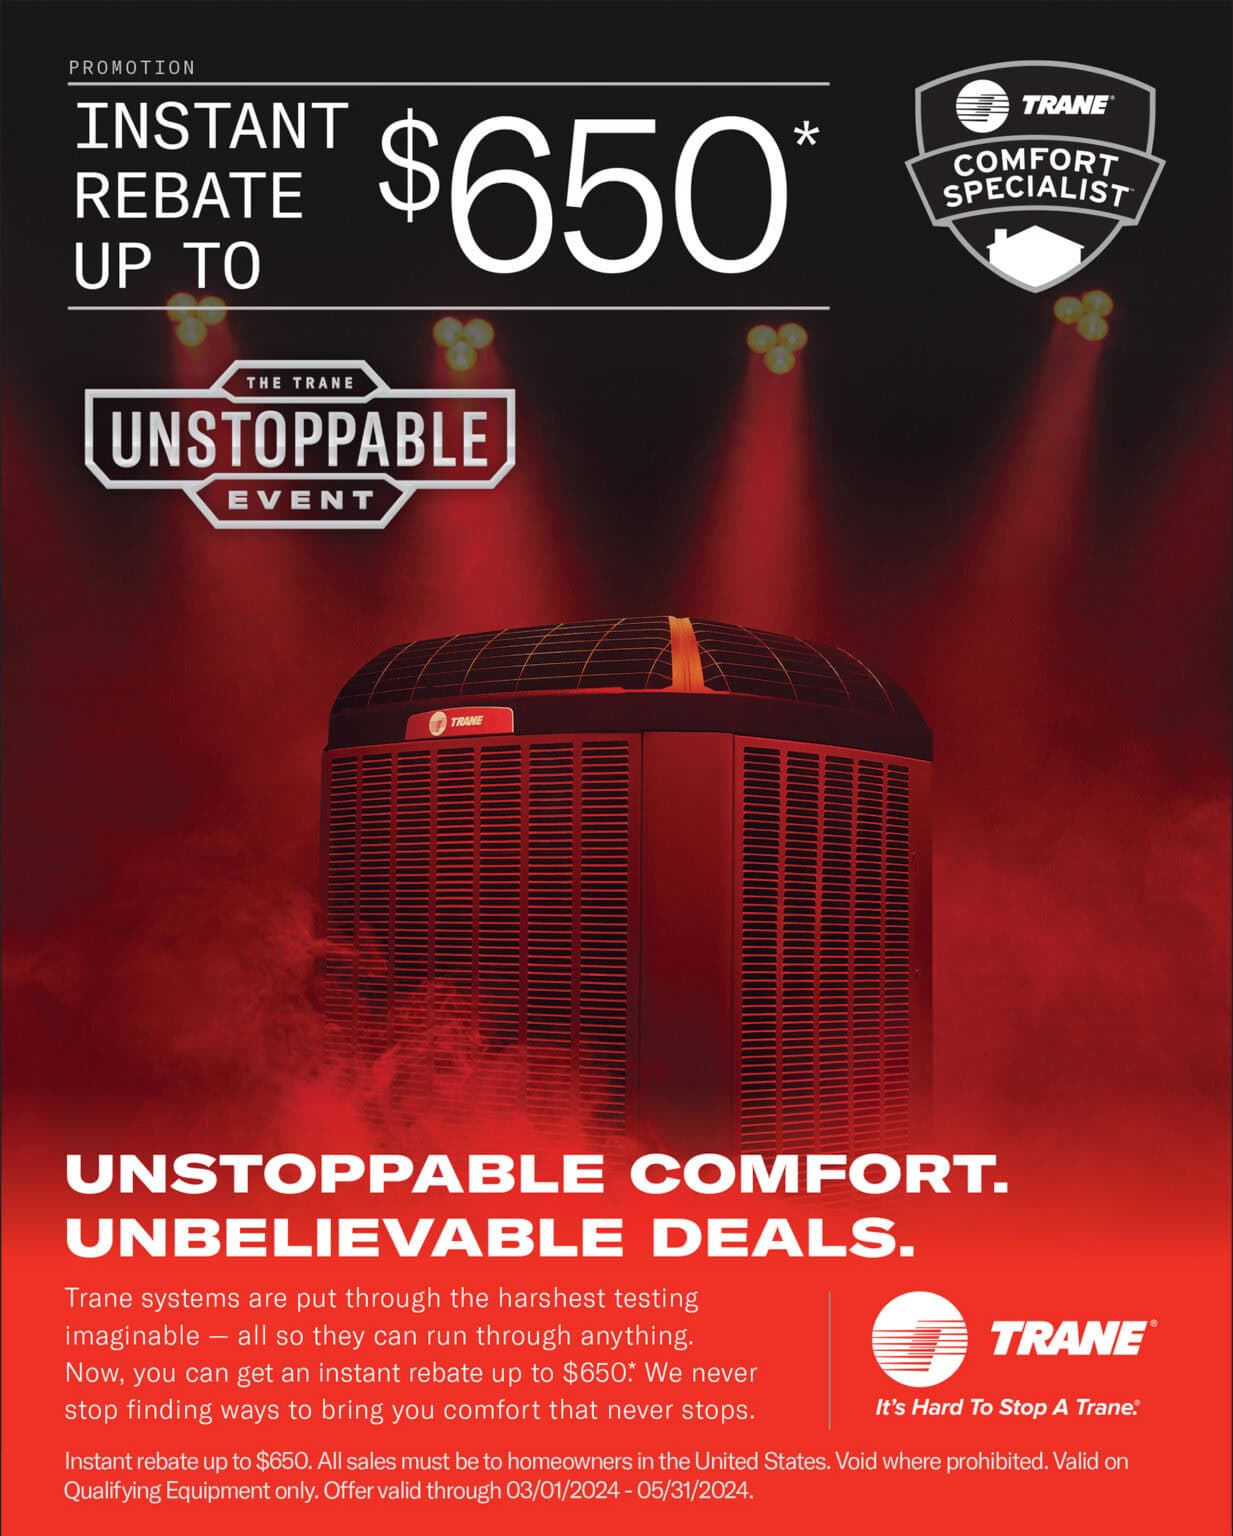 Trane promotion: instant rebate up to $650* UNSTOPPABLE COMFORT. UNBELIEVABLE DEALS. Trane systems are put through the harshest testing imaginable - all so they can run through anything. Now, you can get an instant rebate up to $650: We never stop finding ways to bring you comfort that never stops. Instant rebate up to $650. All sales must be to homeowners in the United States. Void where prohibited. Valid on Qualifying Equipment only. Offer valid through 03/01/2024 - 05/31/2024.